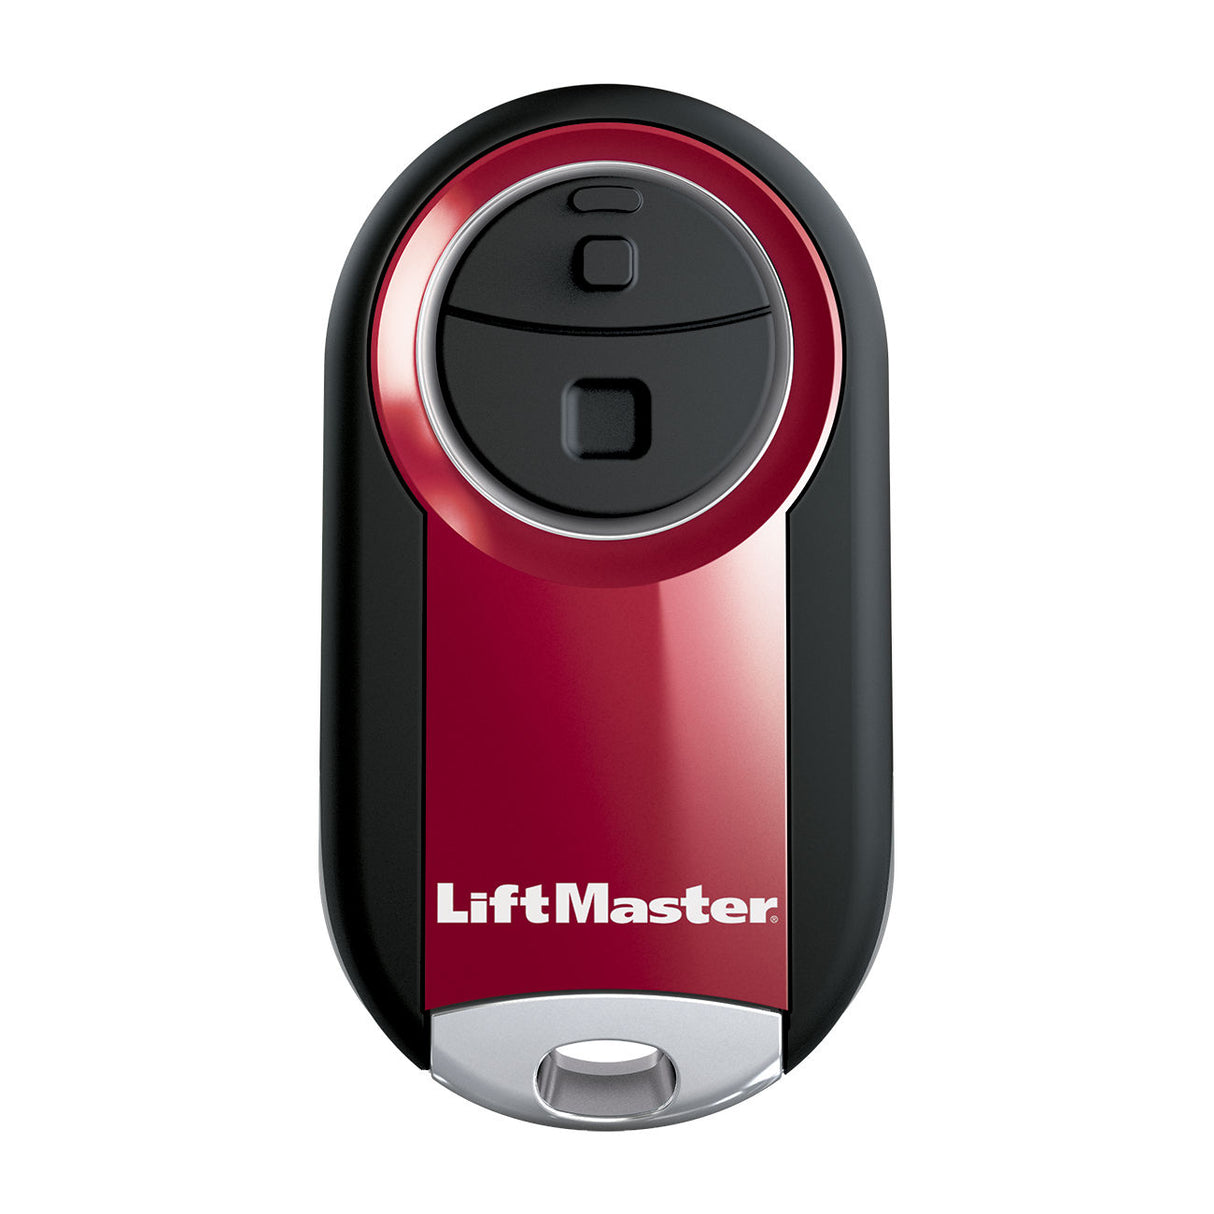 Liftmaster 374UT front view